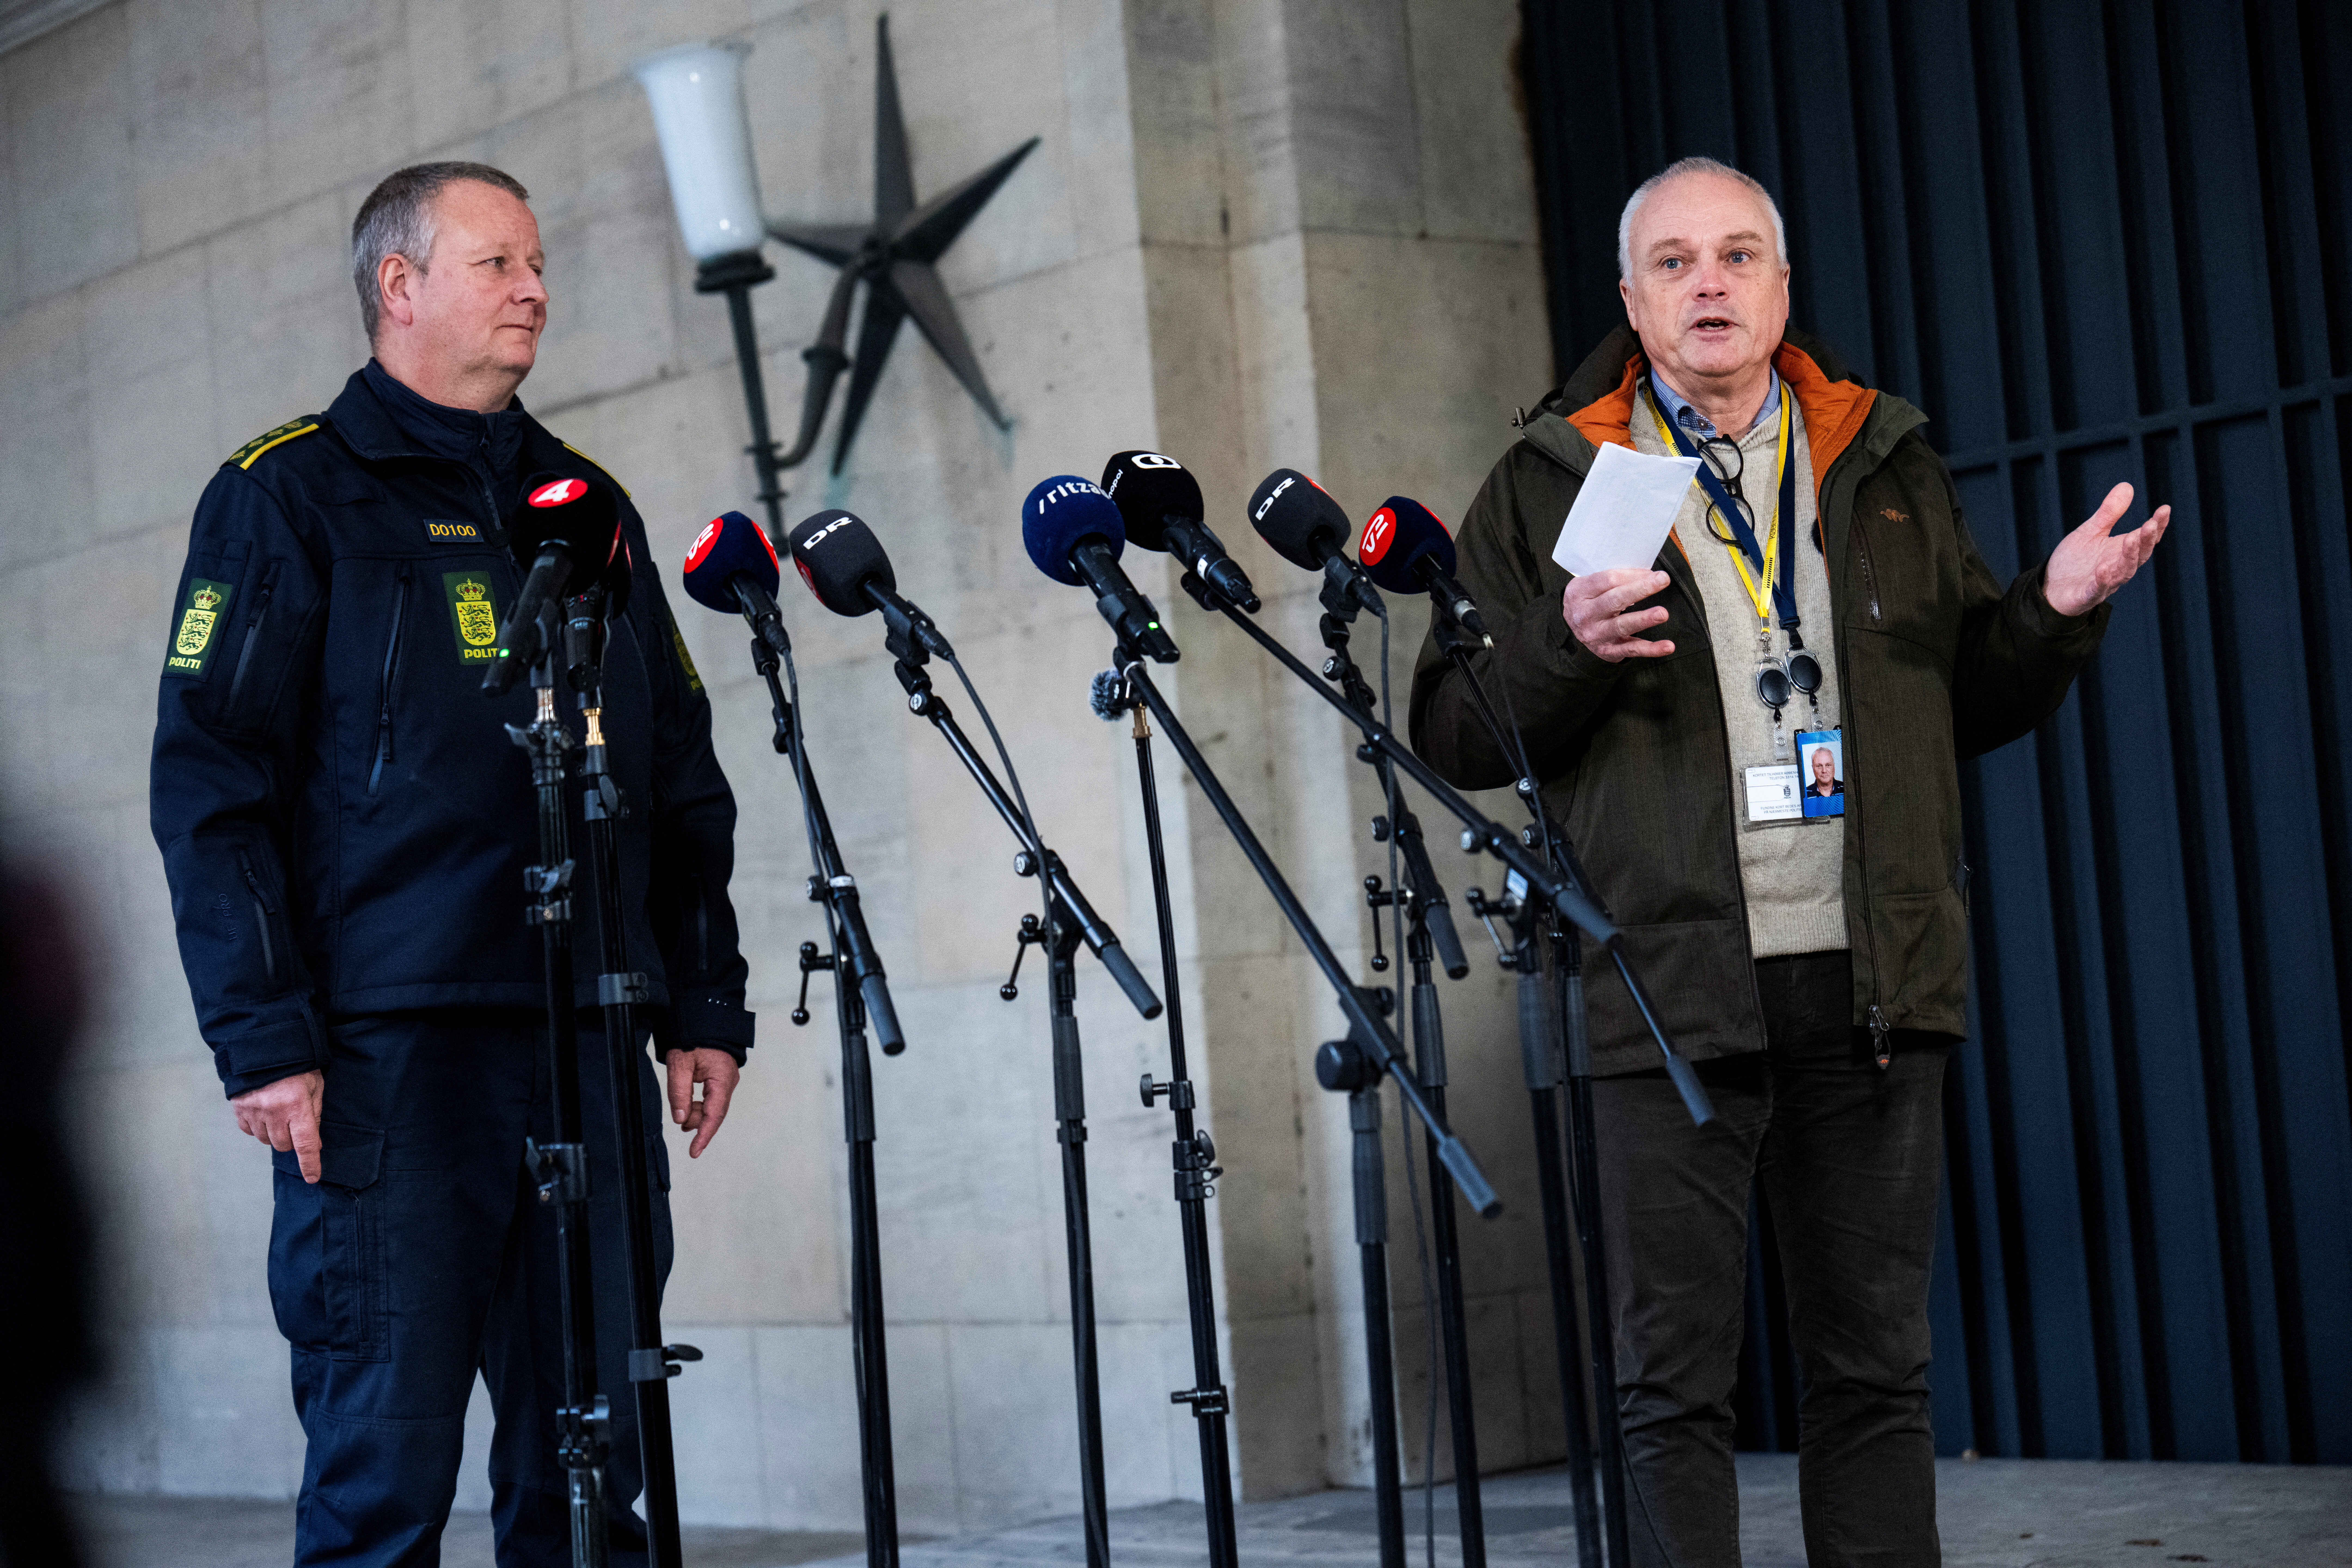 Copenhagen Police and PET hold a press briefing on coordinated police action, in Copenhagen